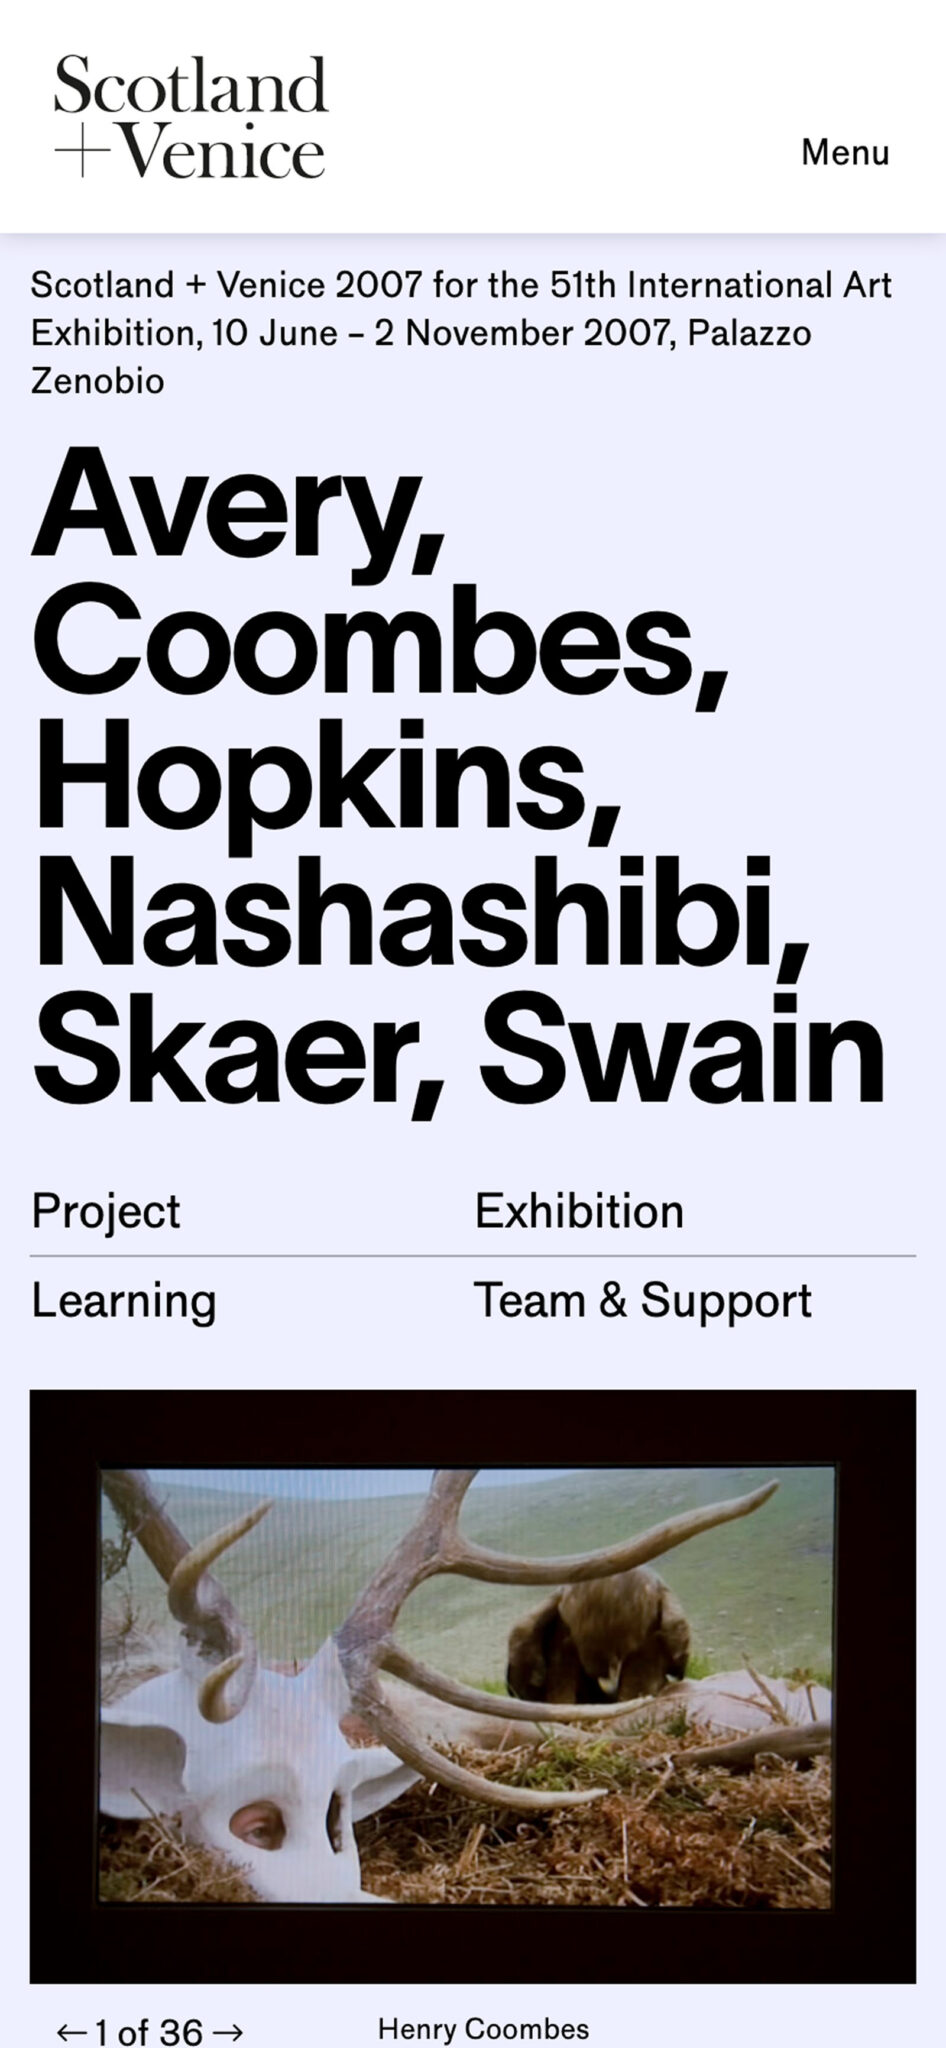 Mobile Scotland and Venice Website showing an exhibition